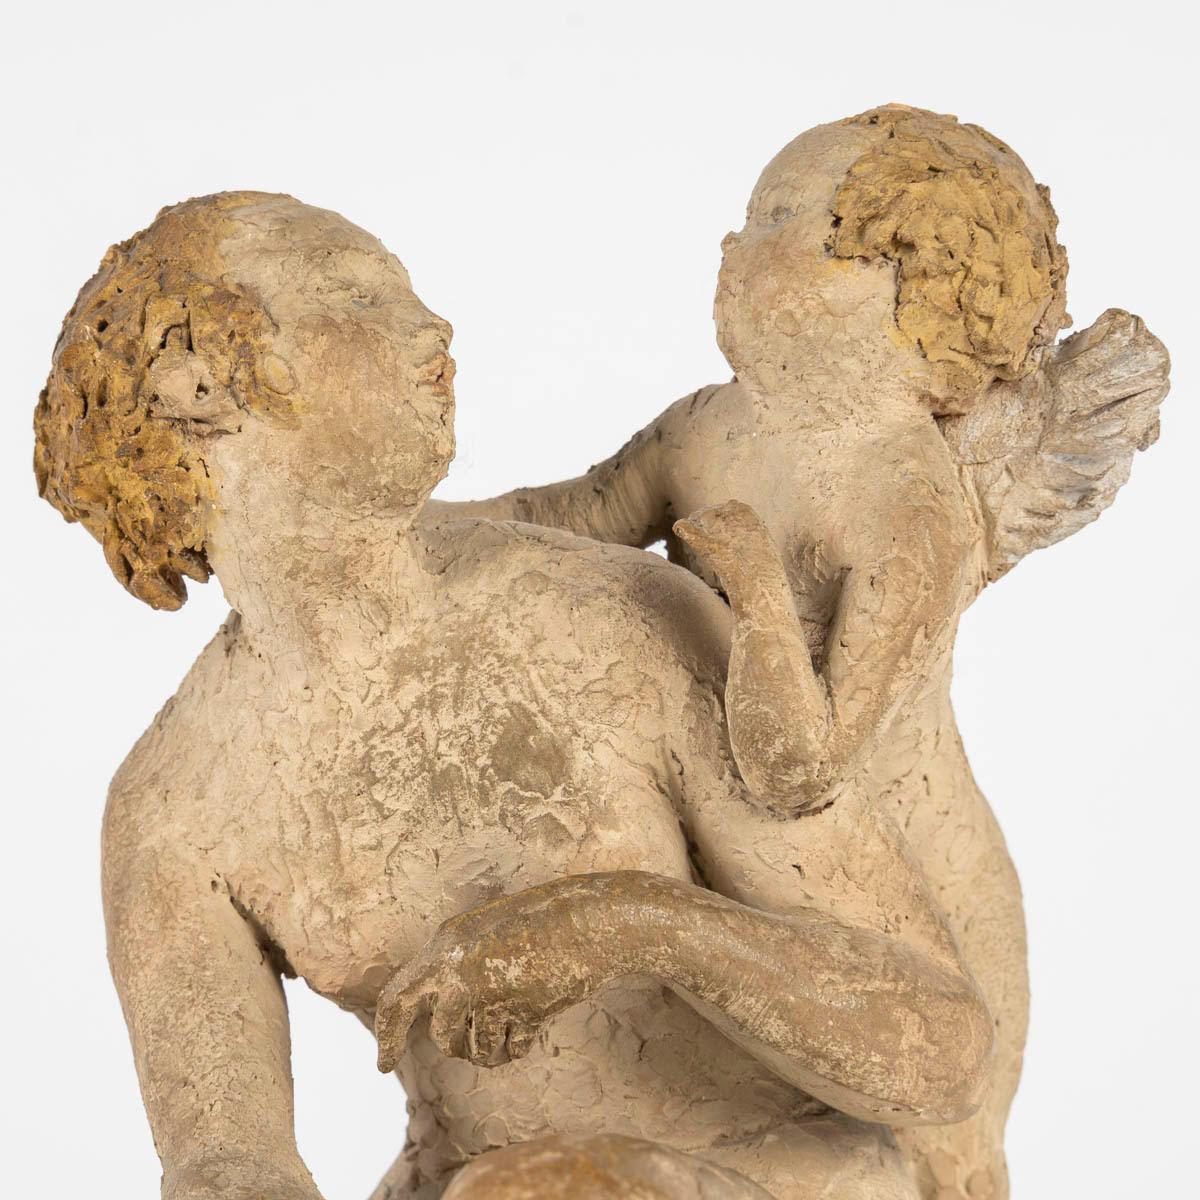 Terracotta sculpture by Arry Bitter, Love and Cupid.

Terracotta sculpture by Arry Bitter, Love and Cupid, original terracotta with polychrome remains.
H: 17cm, D: 14cm